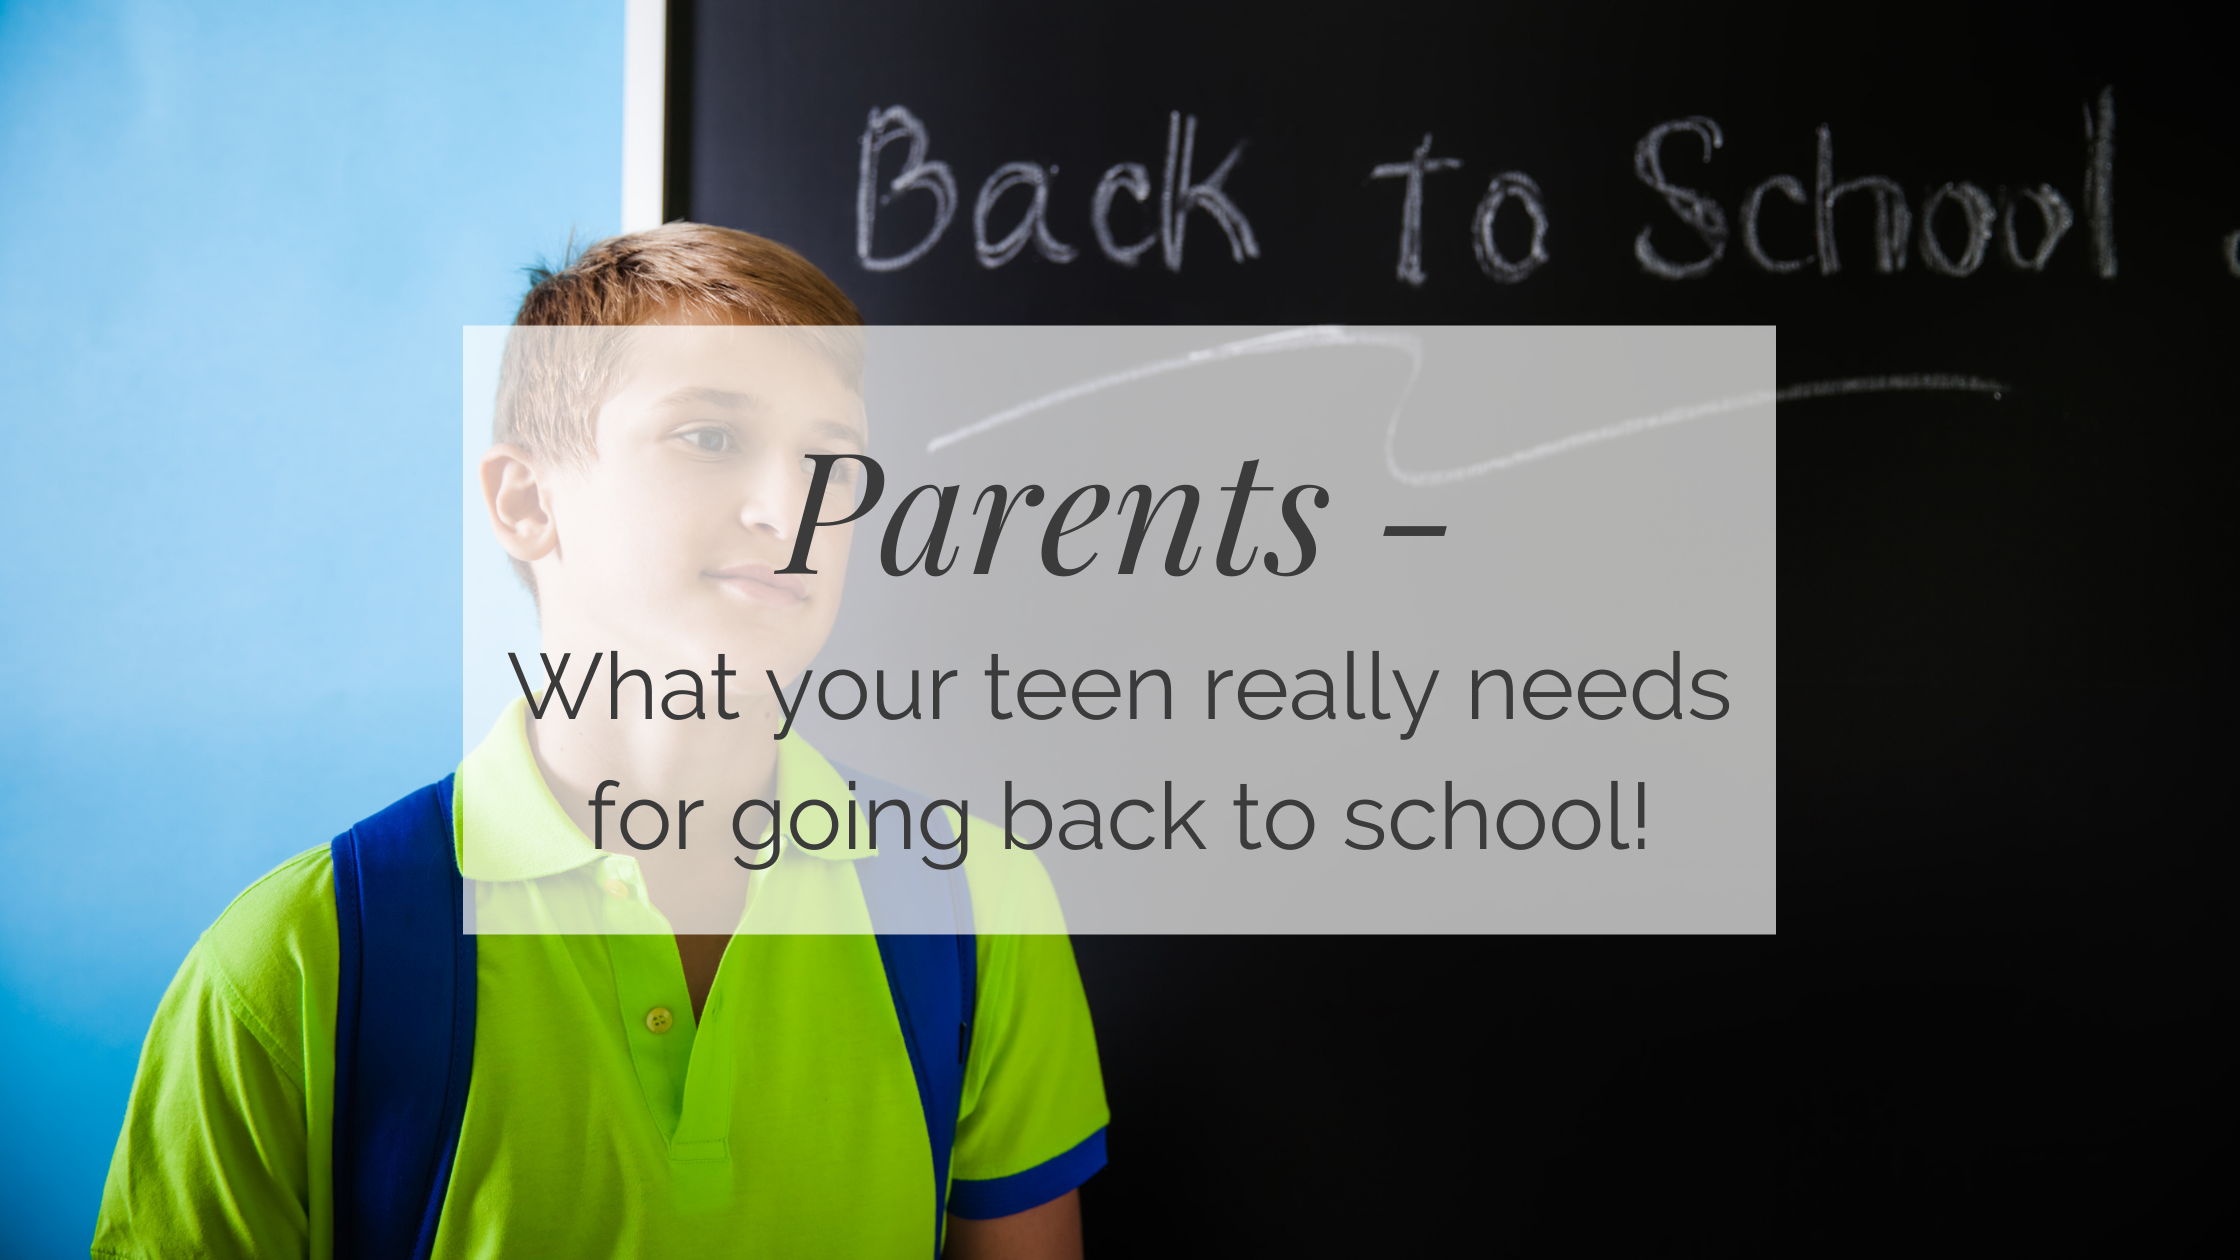 Parents - What your teen really needs for going back to school!